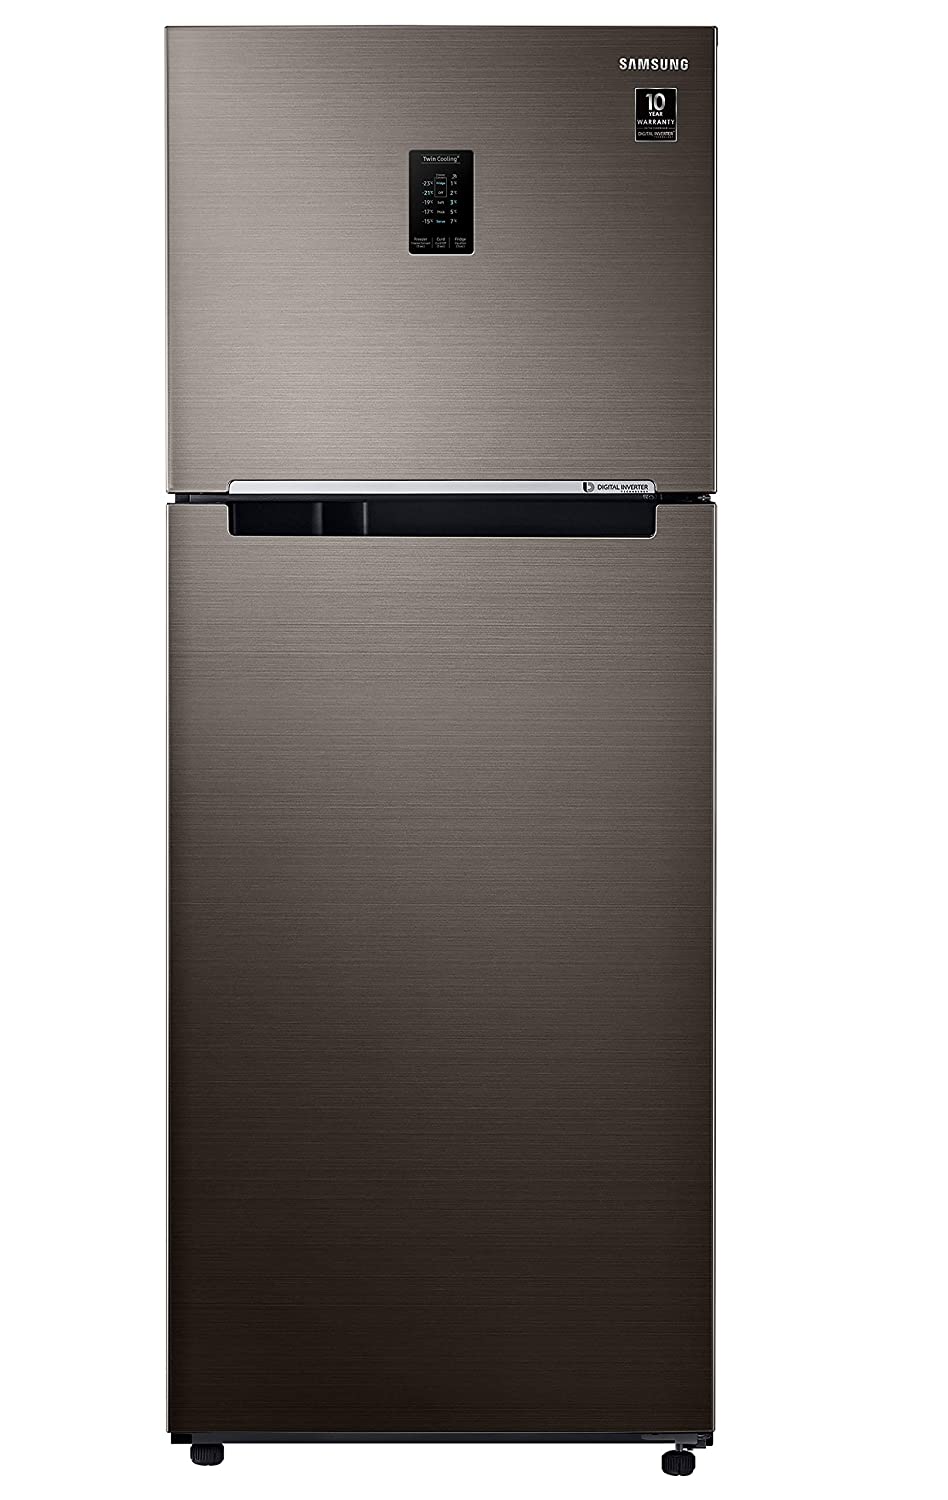 Roll over image to zoom in Samsung 407 L 3 Star Inverter Frost-Free Double Door Refrigerator (RT42T5C5EDX/TL, Luxe Brown) )